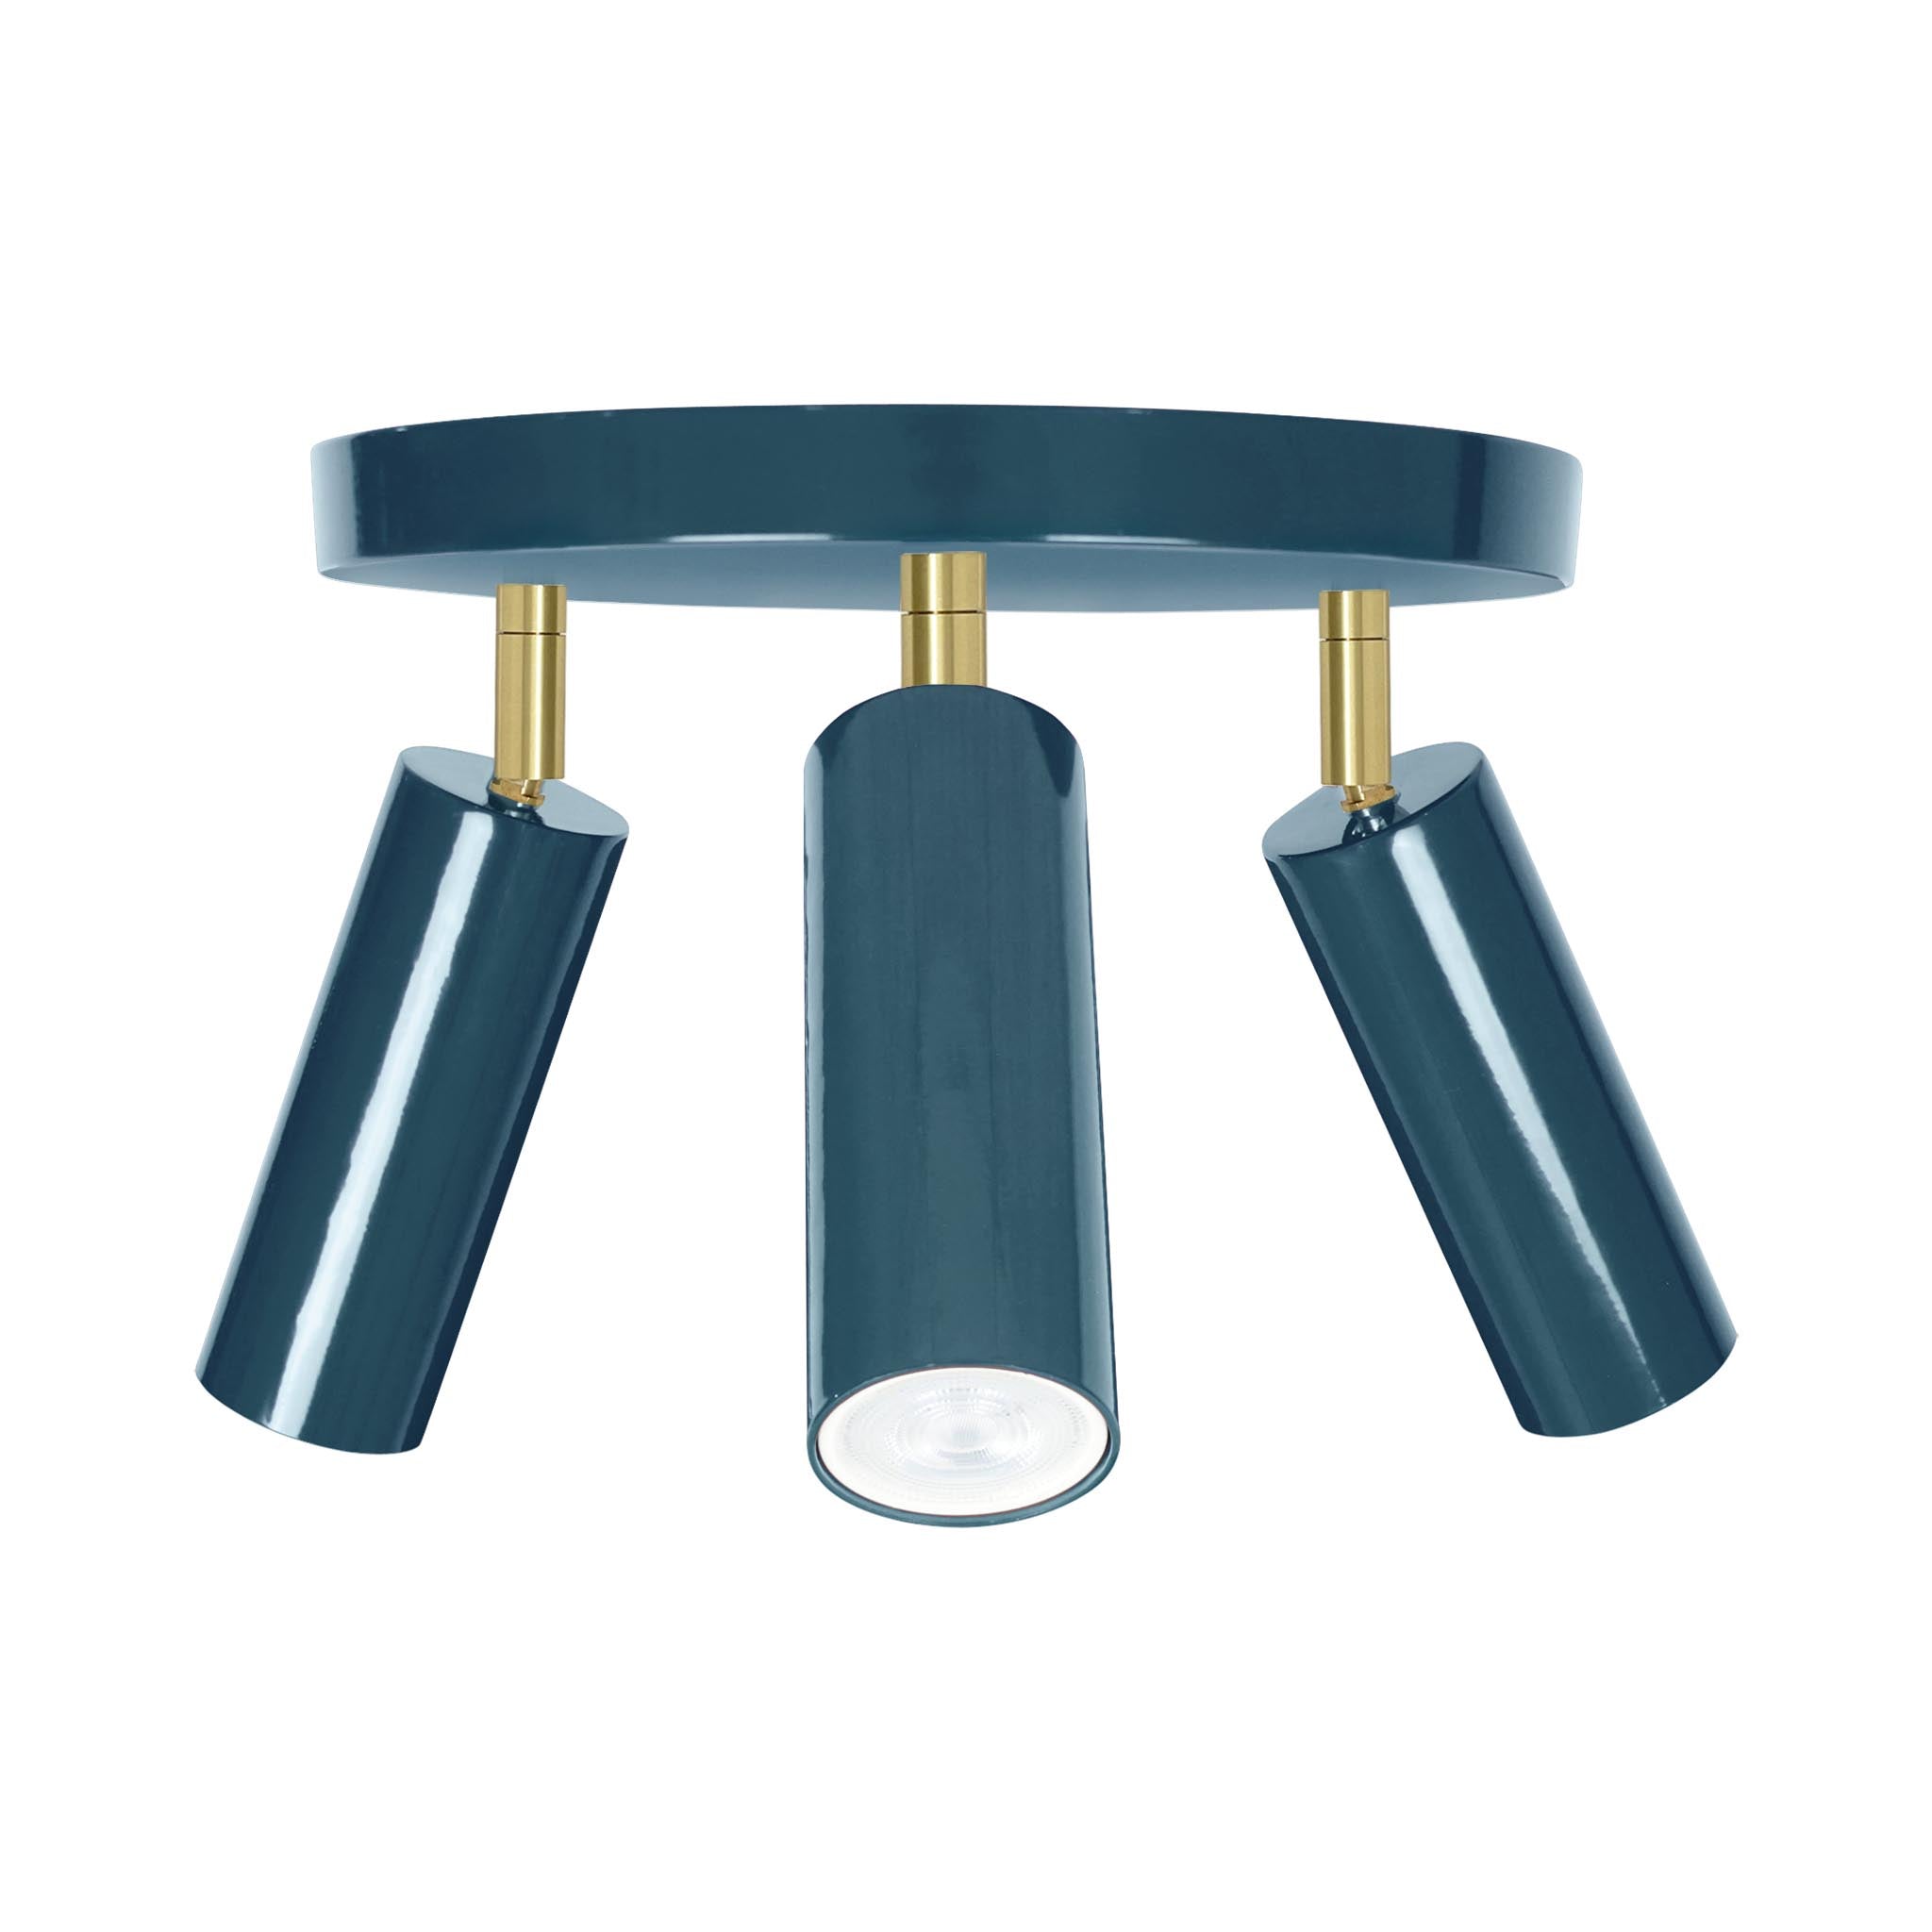 Brass and slate blue color Pose flush mount Dutton Brown lighting